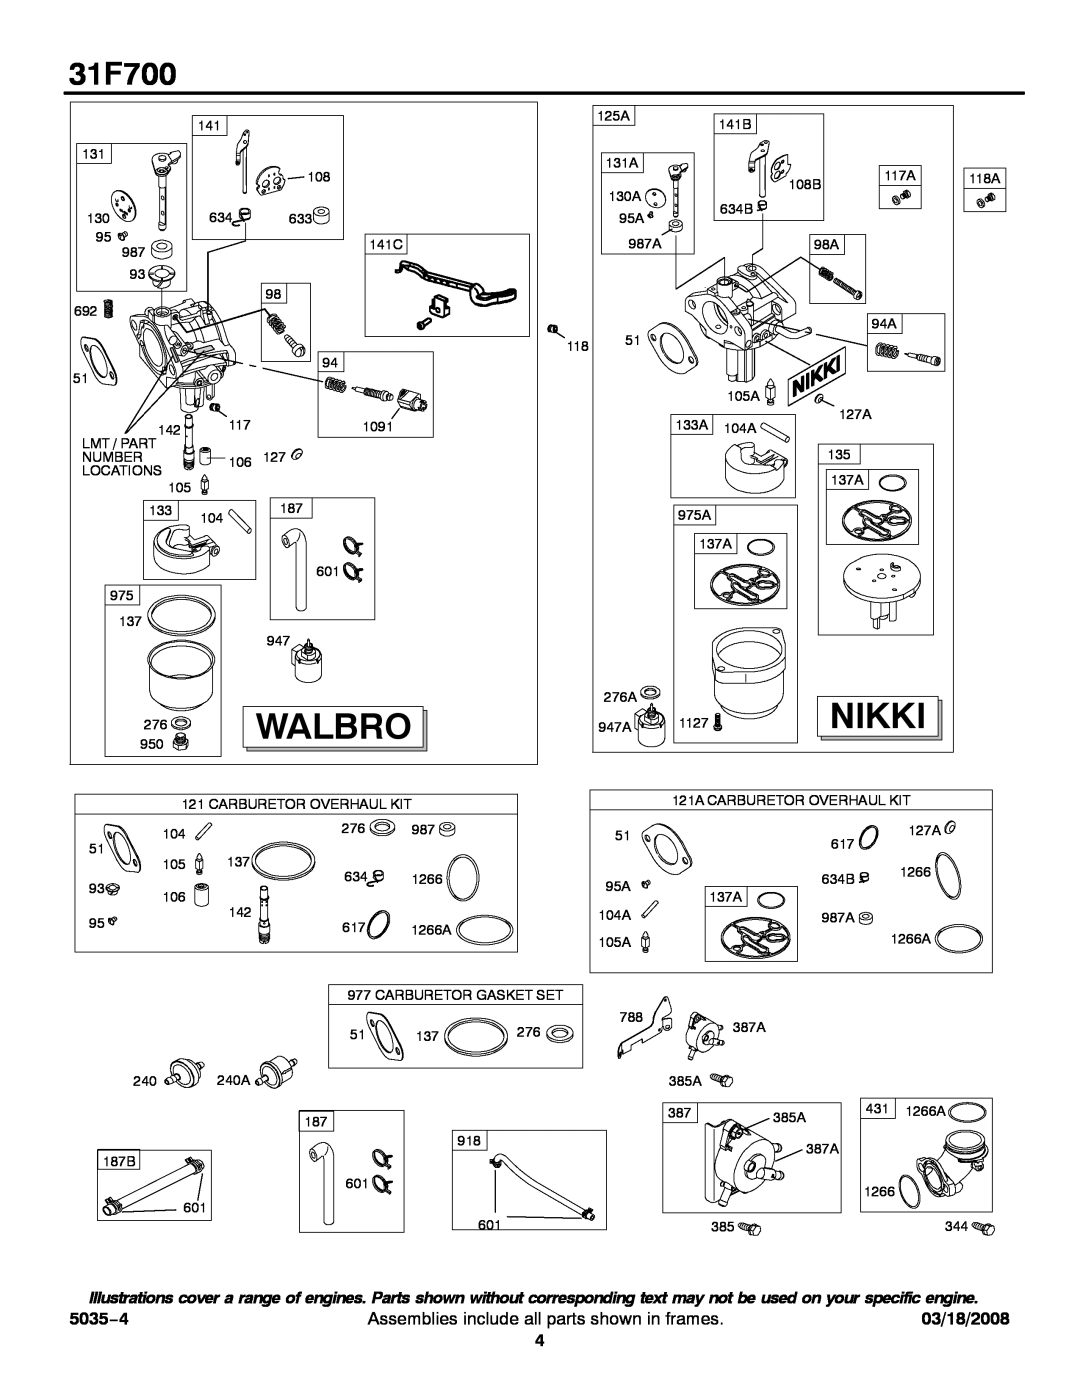 Briggs & Stratton 31F700 Series Nikki, 5035−4, Walbro, Assemblies include all parts shown in frames, 03/18/2008 